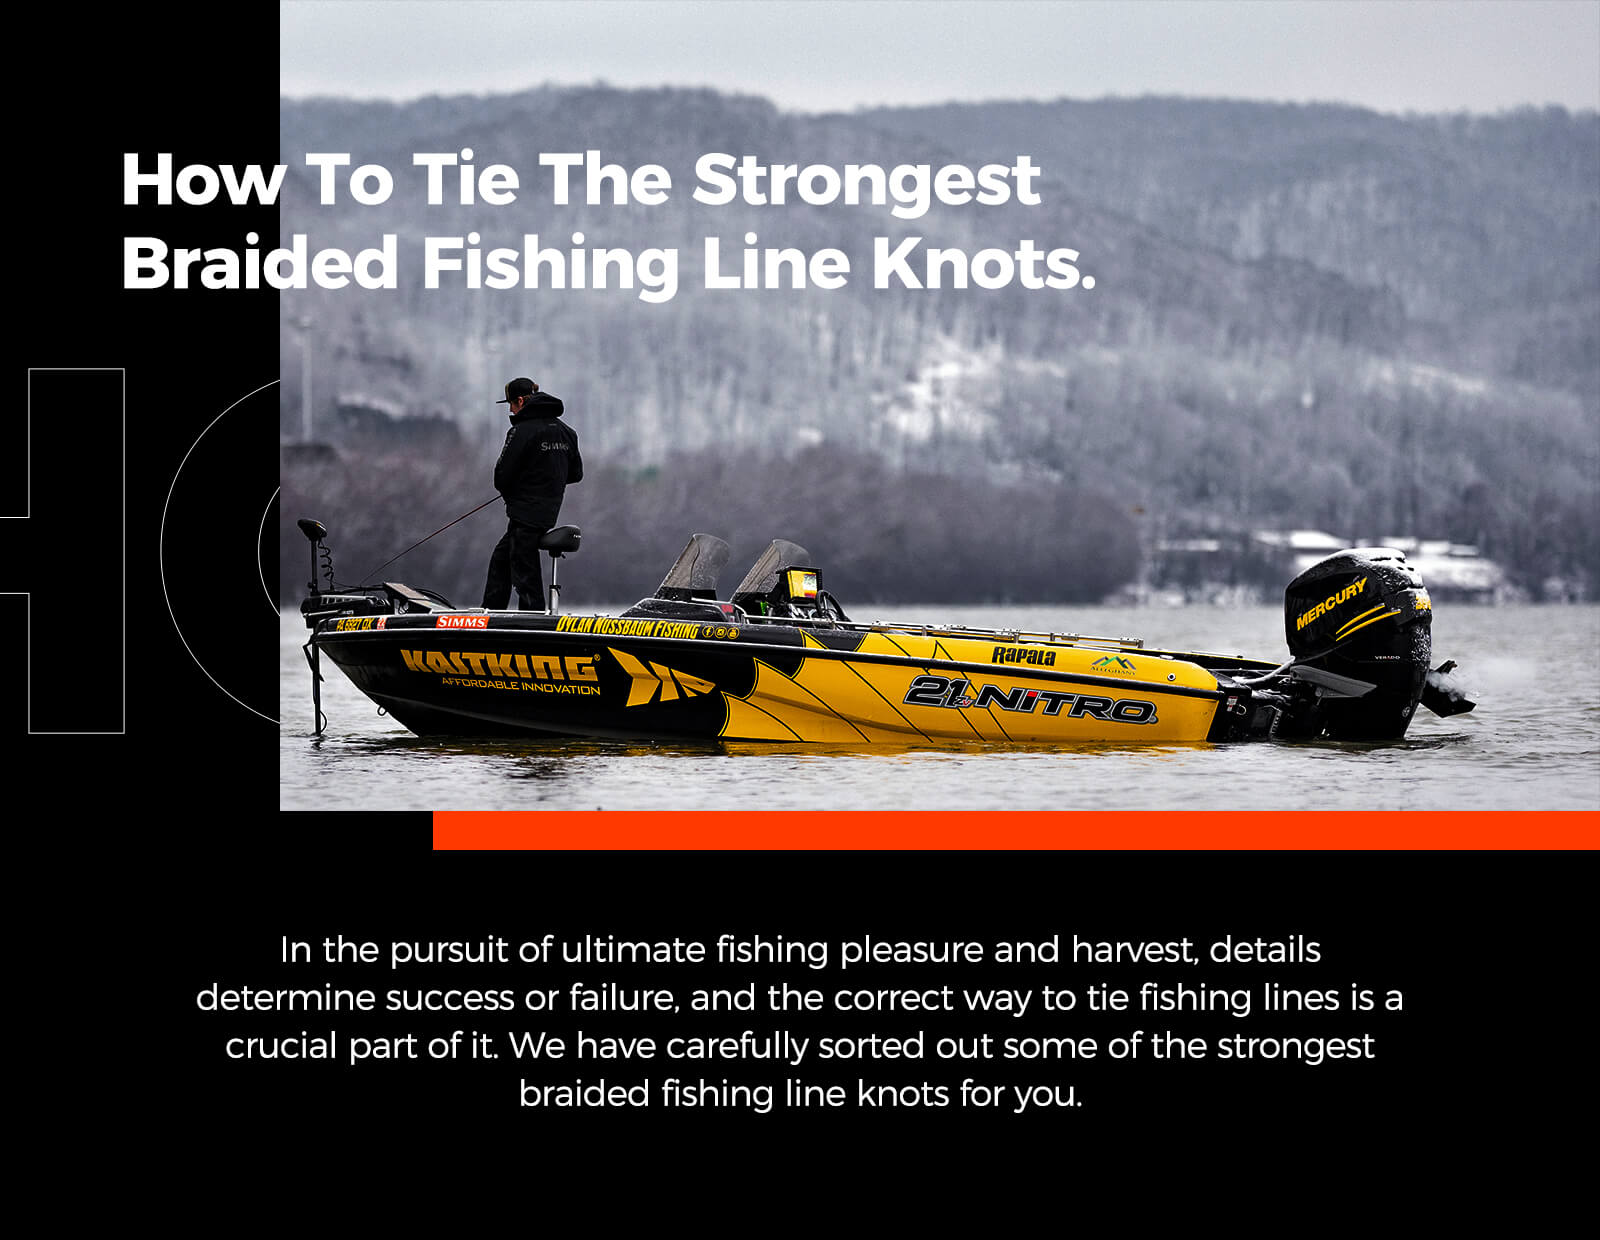 Do you know how to tie the strongest knots in braided fishing line